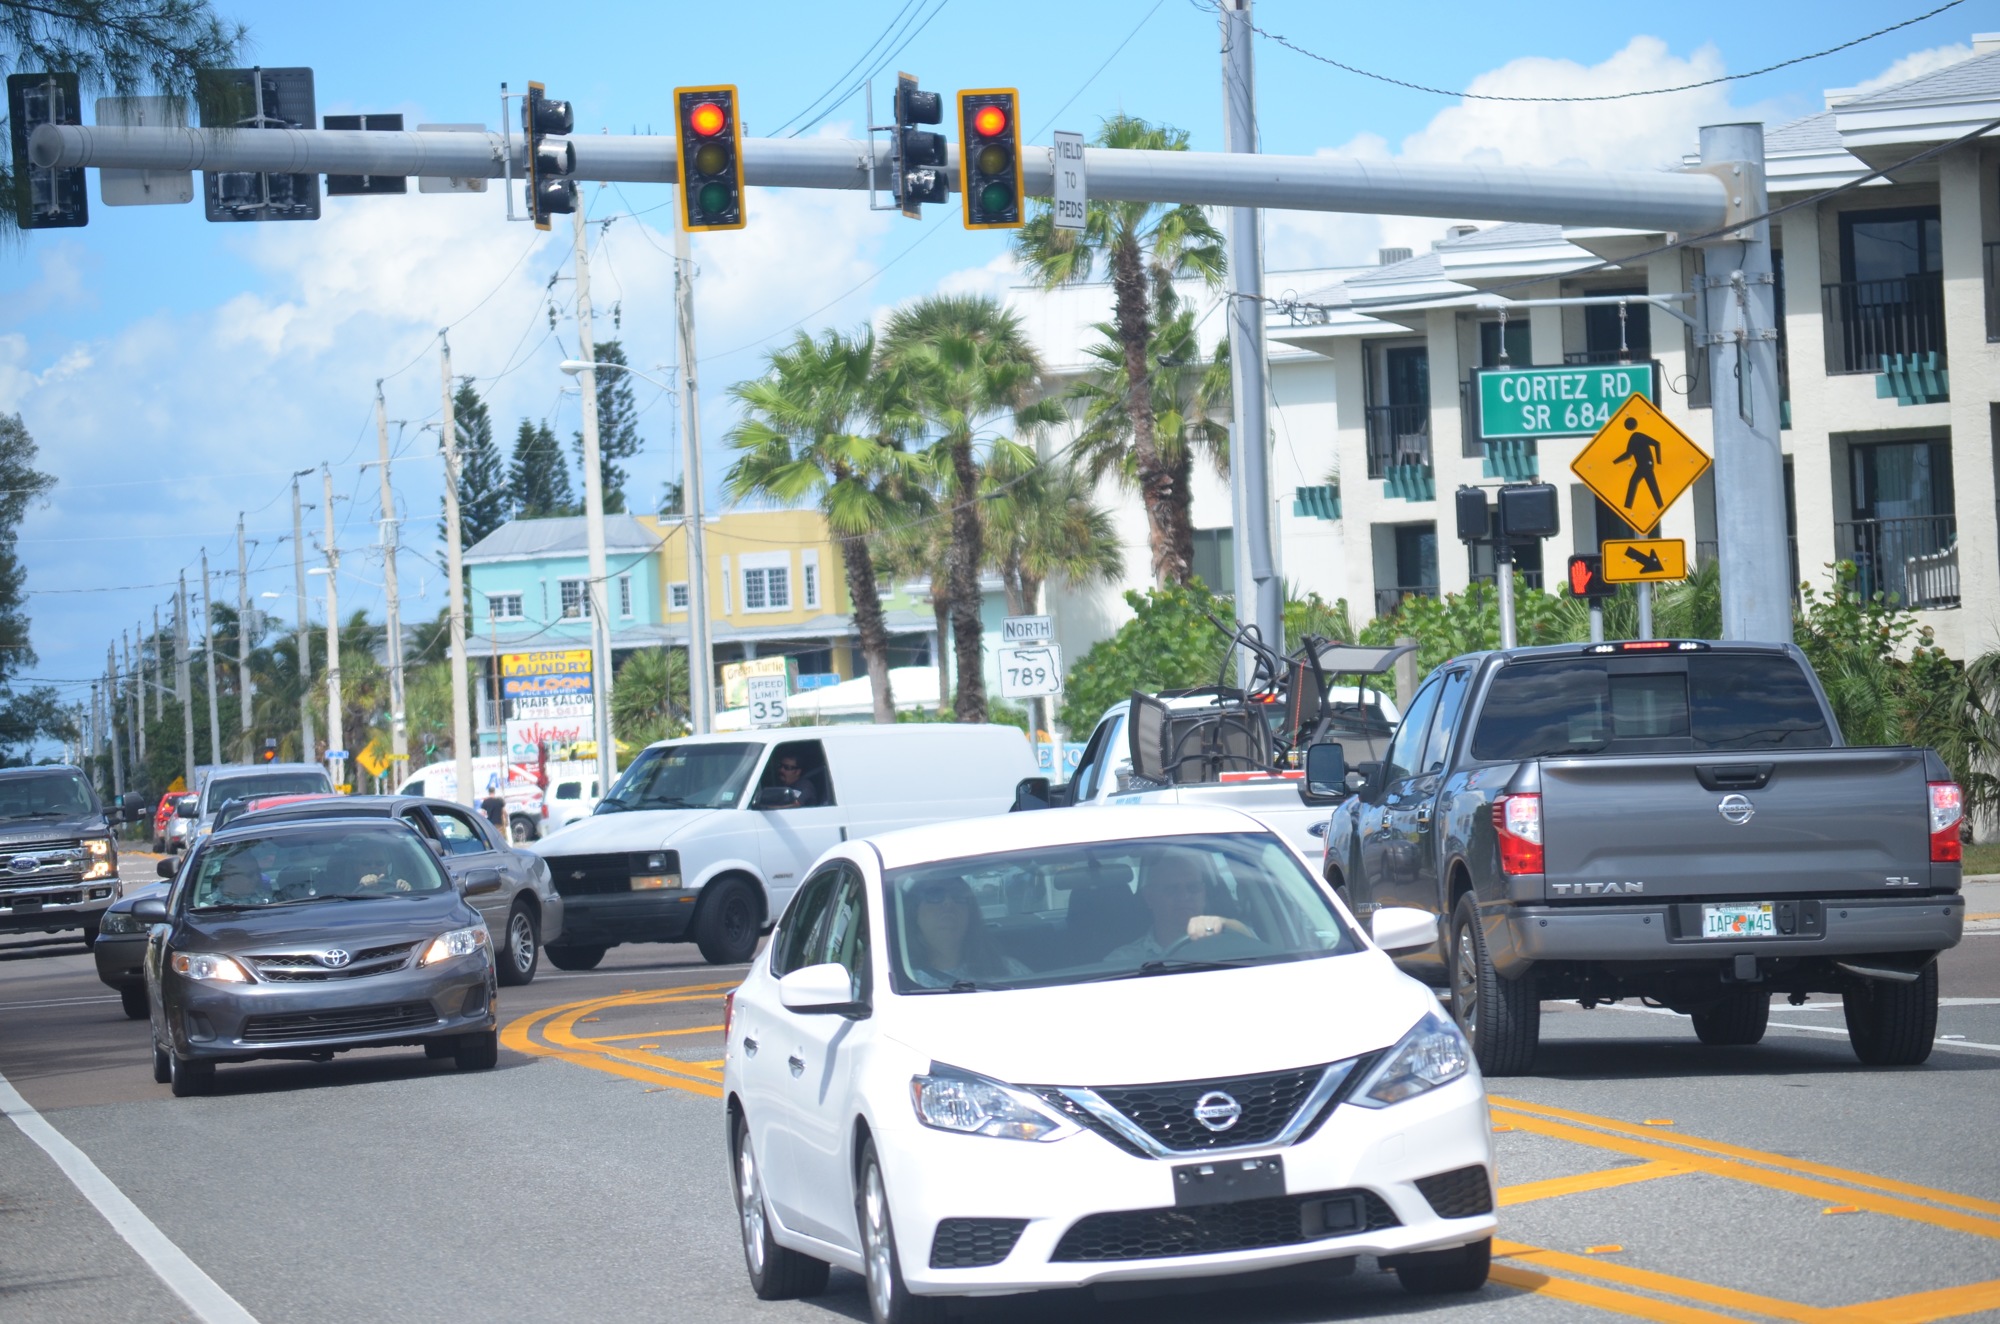 Gulf Drive and Cortez Road is frequently mentioned as a bottleneck for barrier island traffic.